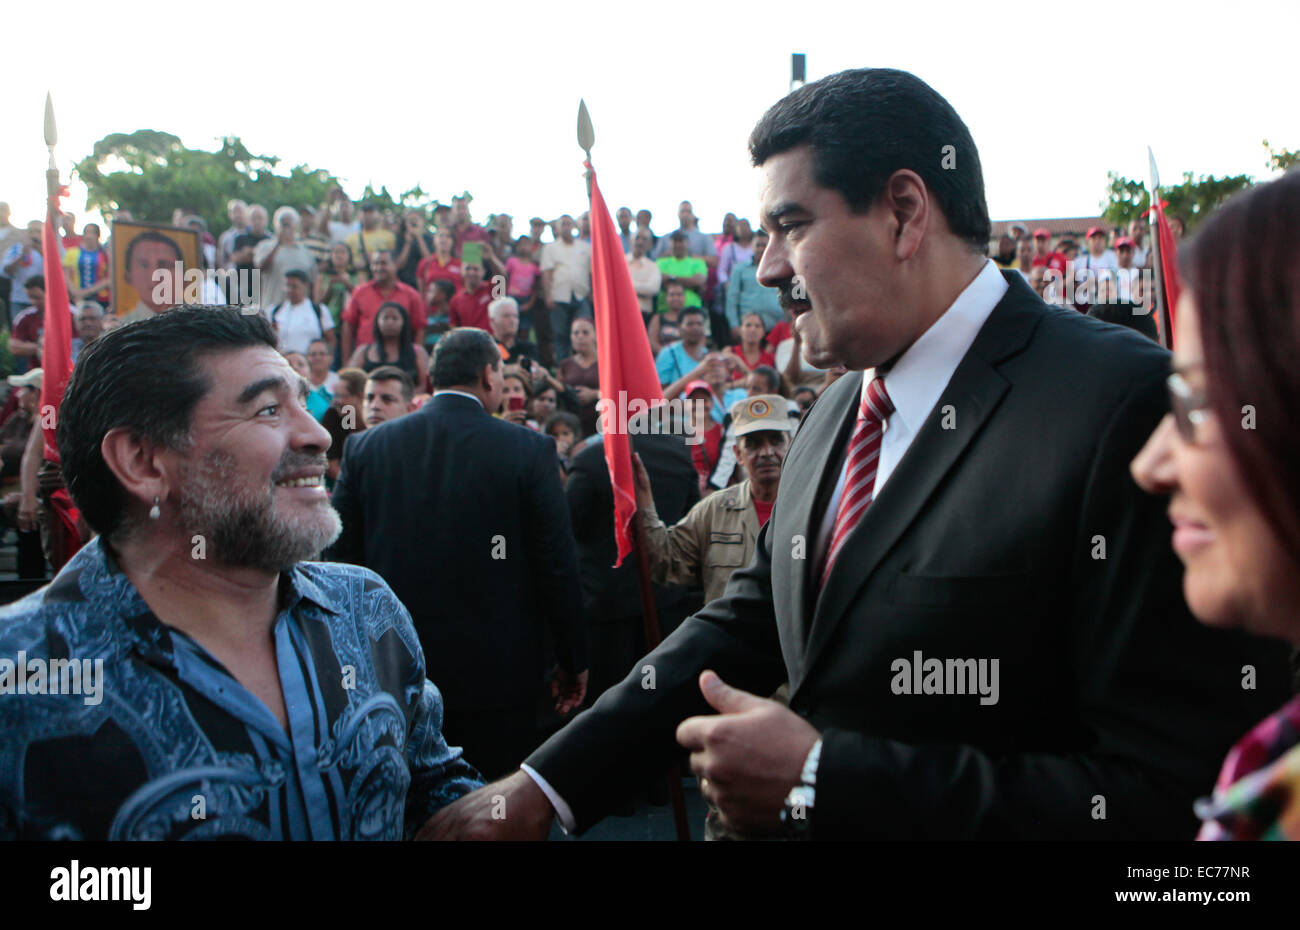 Caracas, Venezuela. 9th Dec, 2014. Image provided by Venezuela's Presidency shows Venezuelan President Nicolas Maduro (R) greeting former Argentine soccer Player Diego Armando Maradona during a ceremony marking the 190th anniversary of the Battle of Ayacucho, at the National Pantheon in Caracas, Venezuela, on Dec. 9, 2014. © Venezuela's Presidency/Xinhua/Alamy Live News Stock Photo